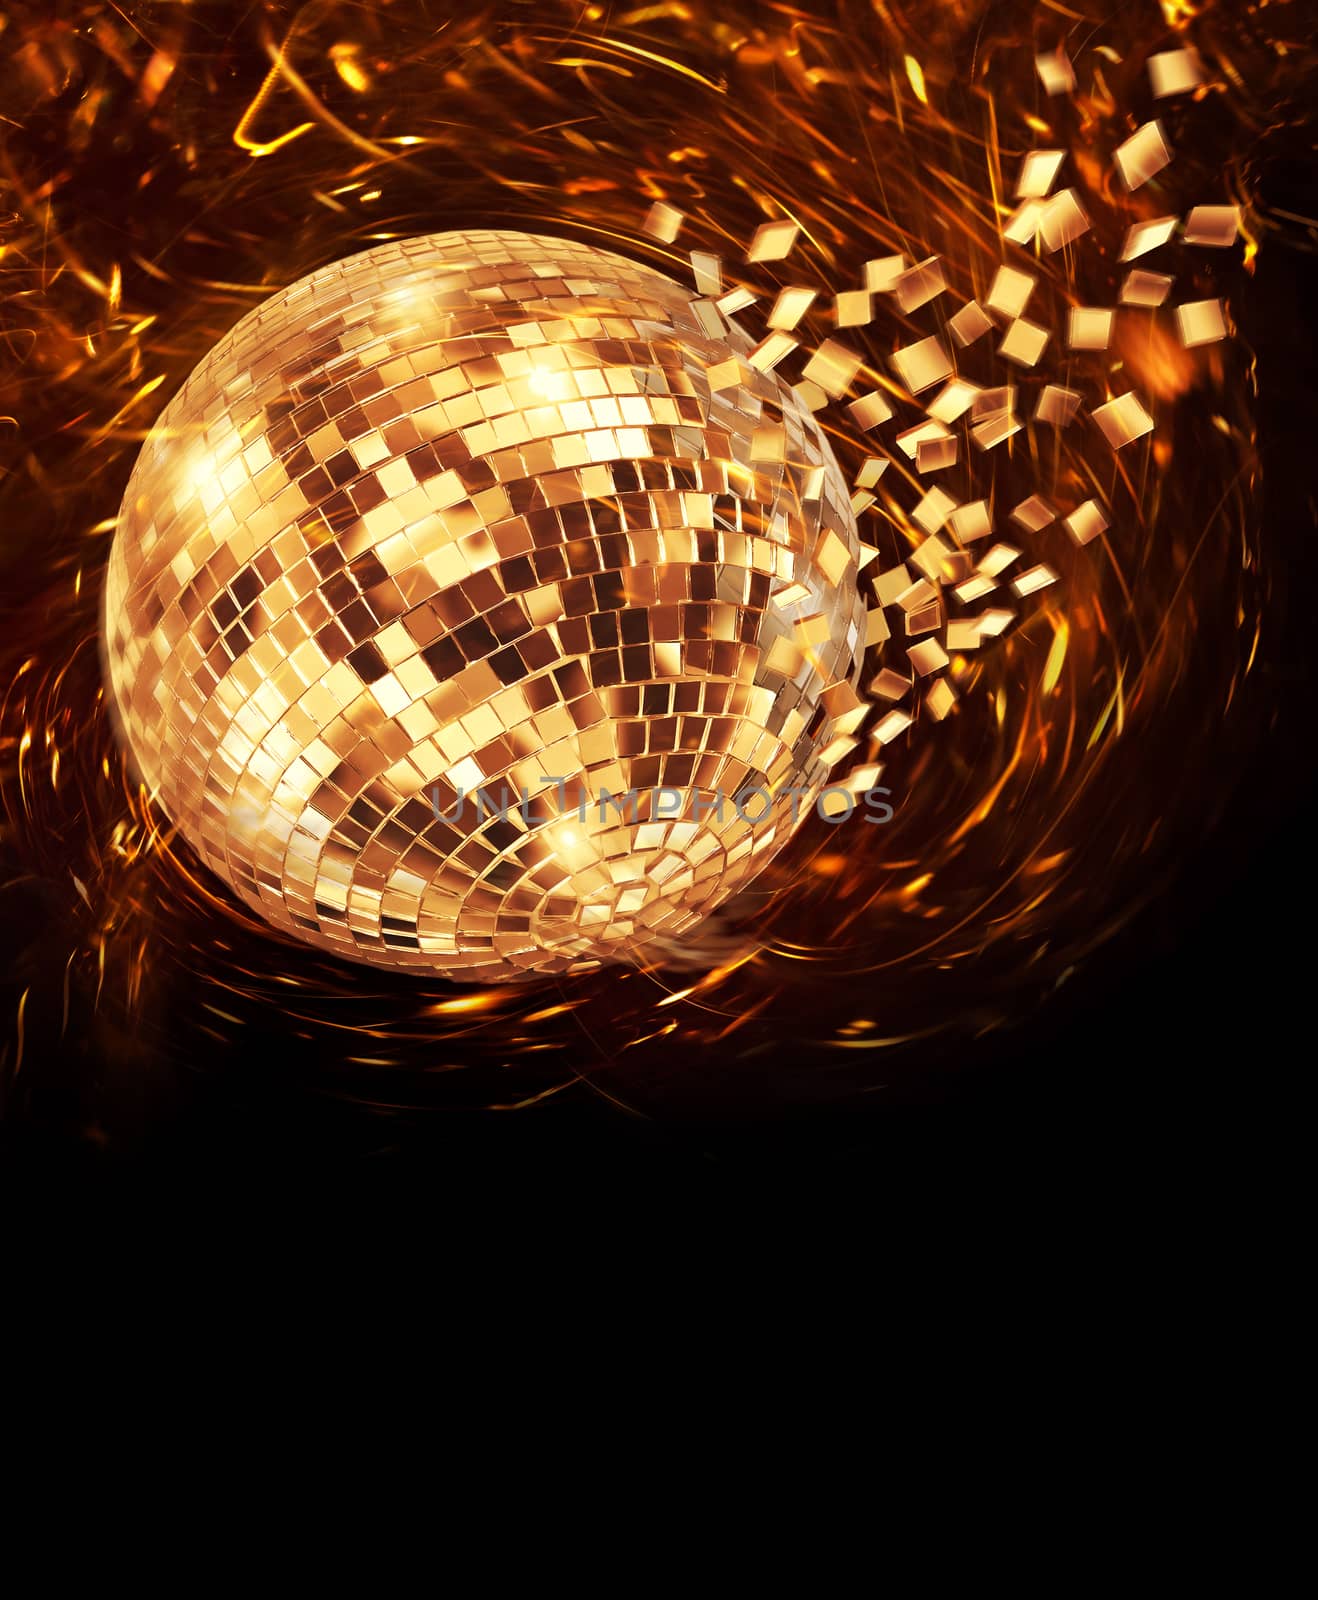 Golden disco mirror ball turning and breaking into fragments by anterovium